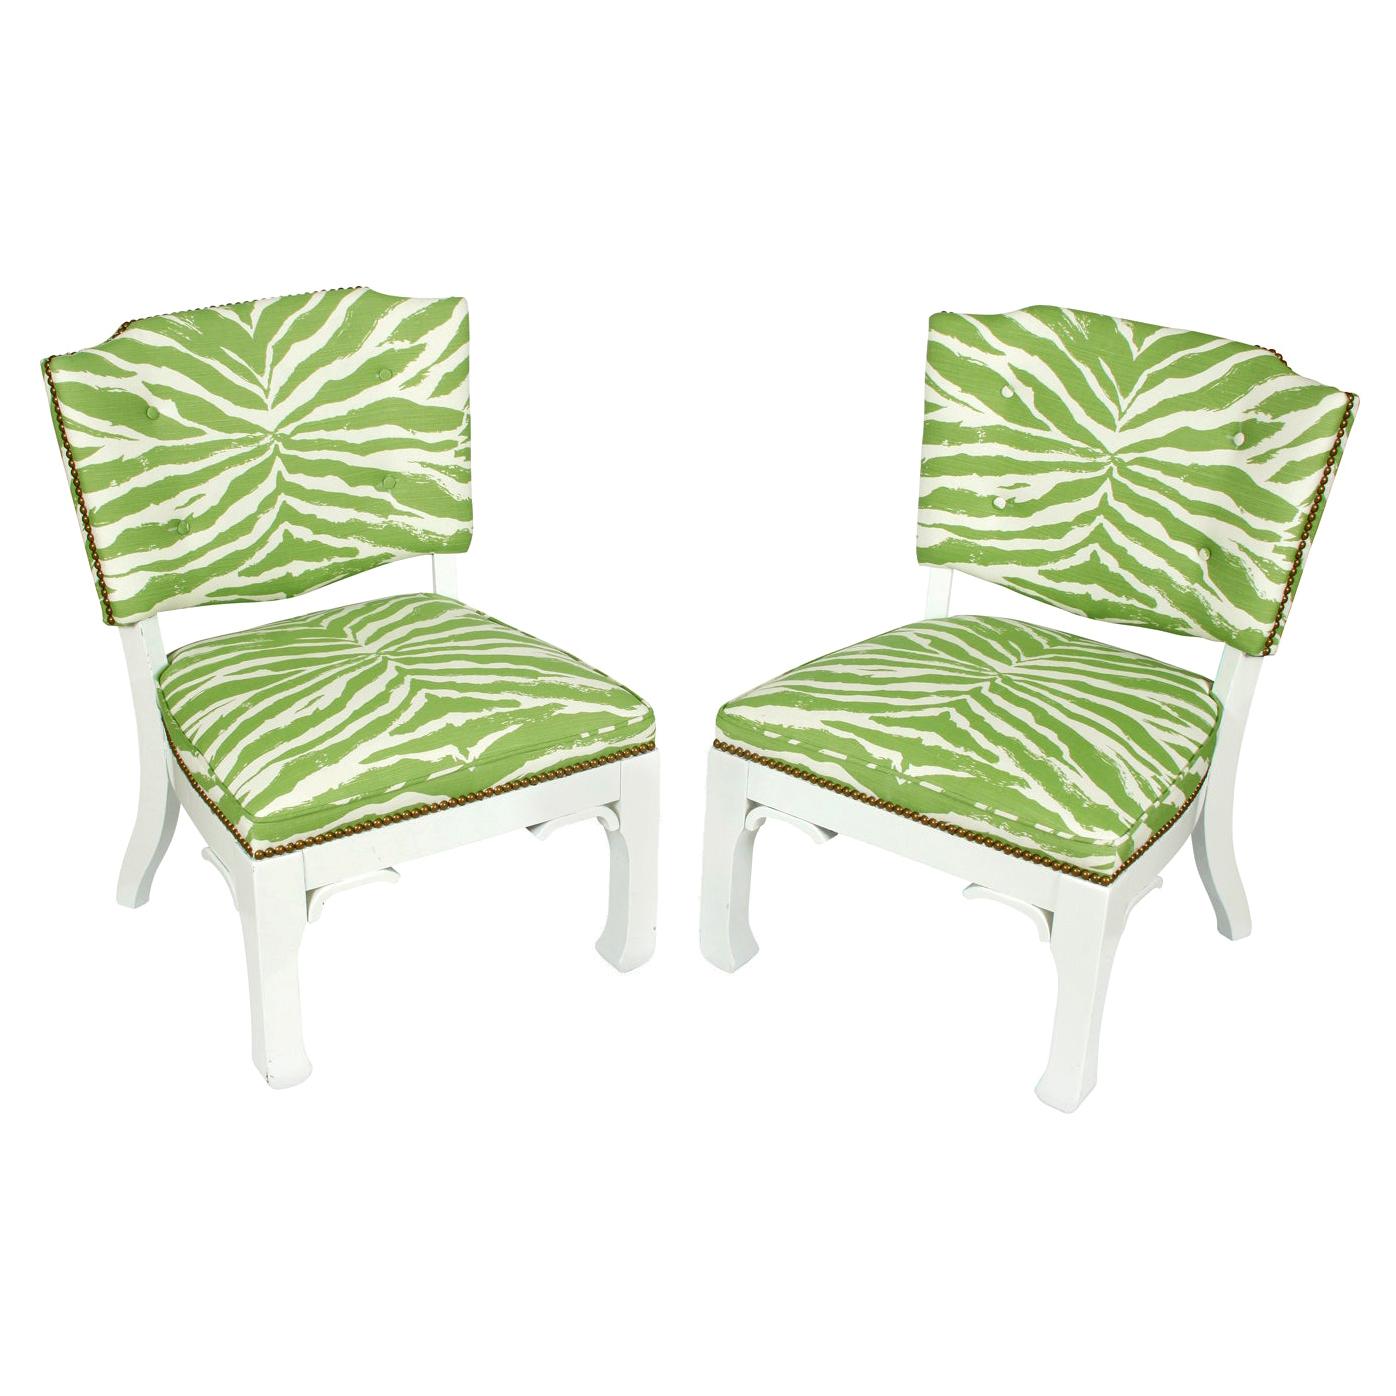 Pair of James Mont Chairs in Green and White Zebra Fabric